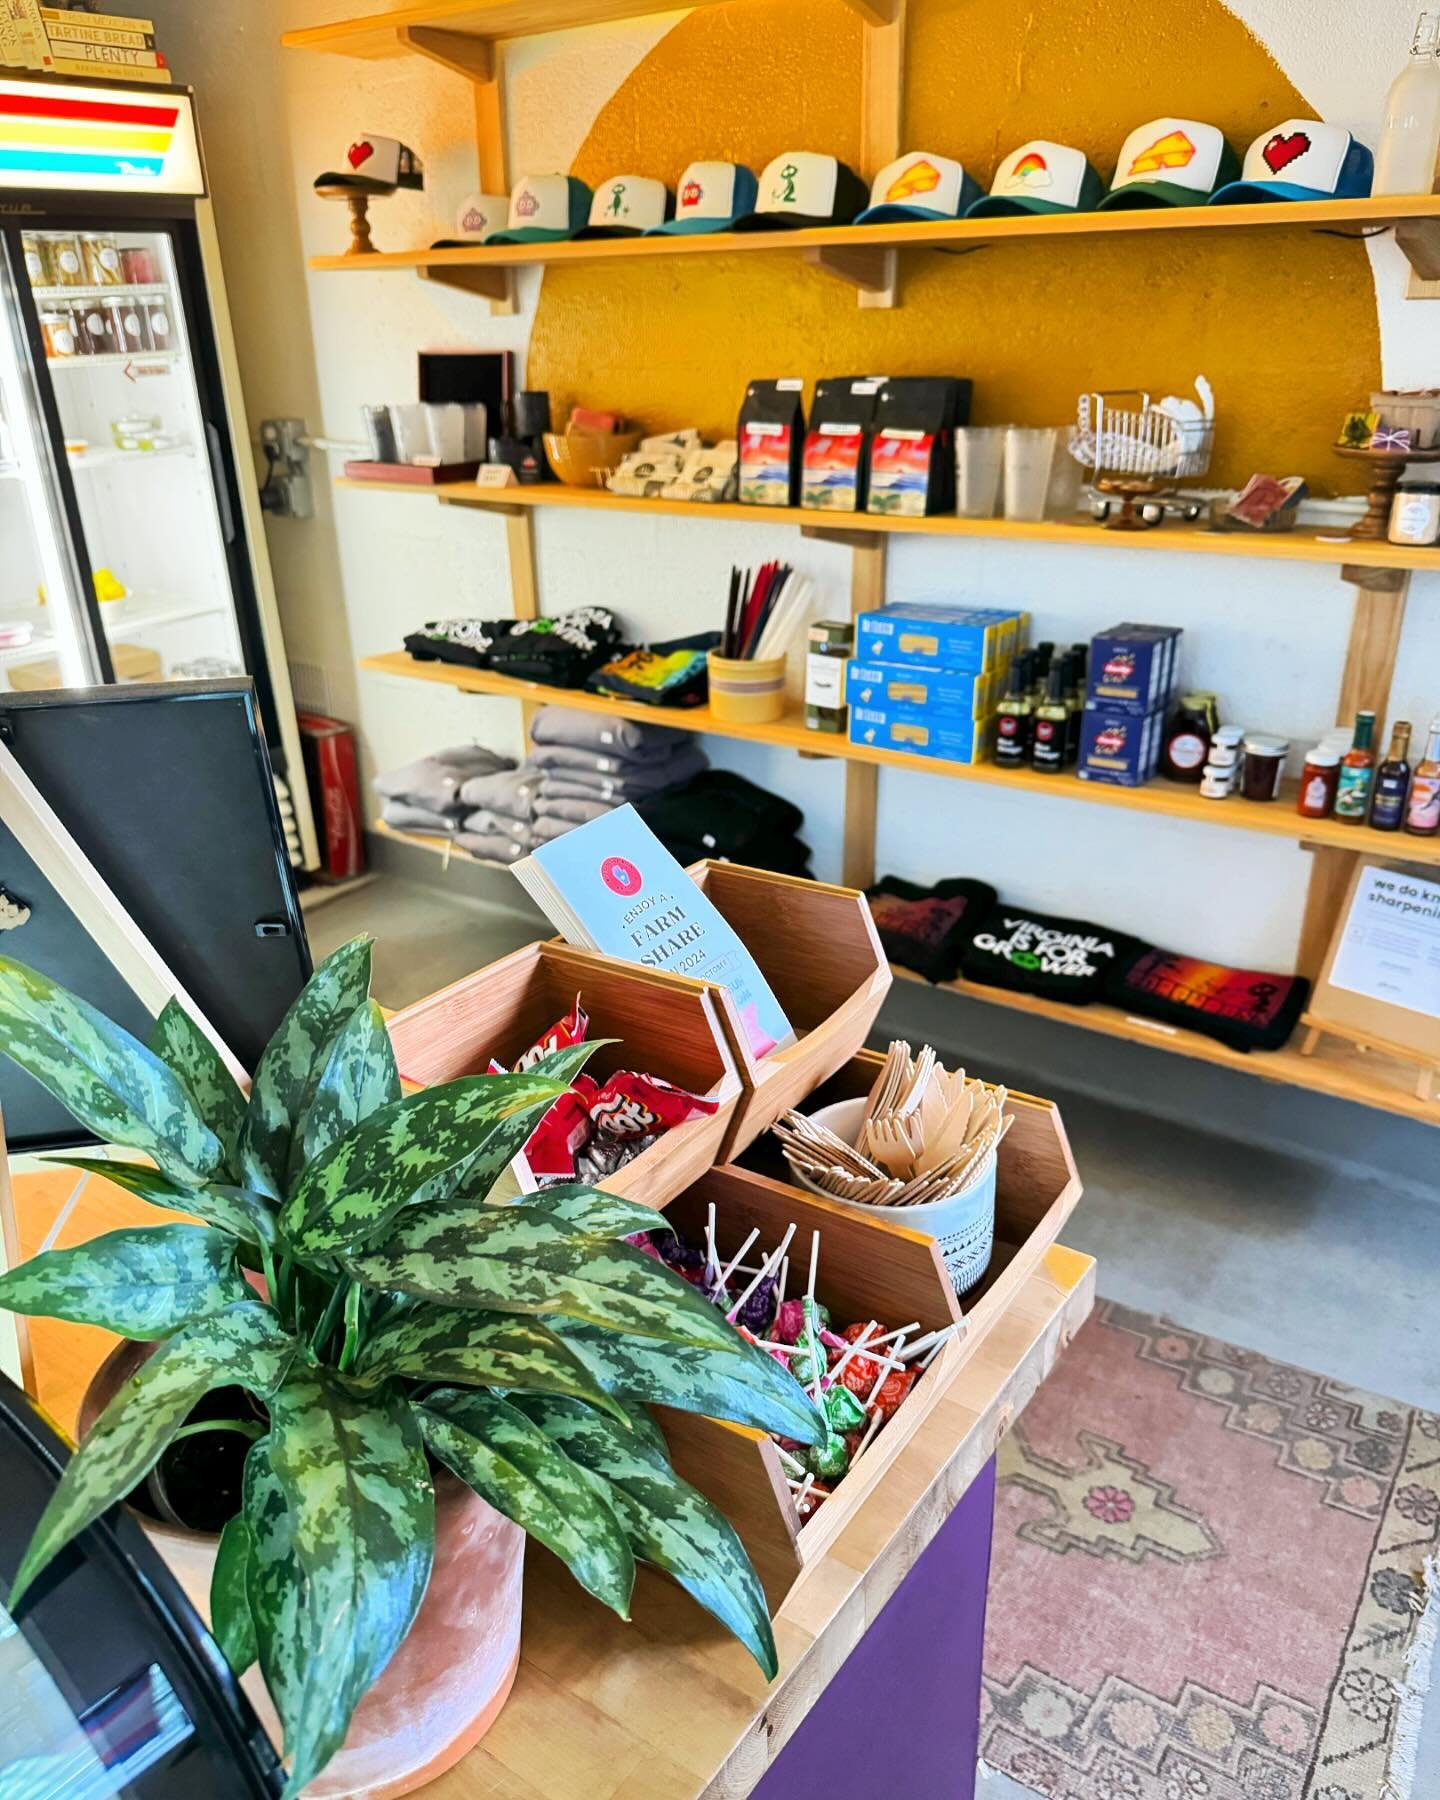 we just love our little storefront! it was not originally part of the business plan but it&rsquo;s morphed into one of my favorite prices of the plenty puzzle. have you stopped in yet? we&rsquo;re open 5 days a week now with a well stocked freezer (T